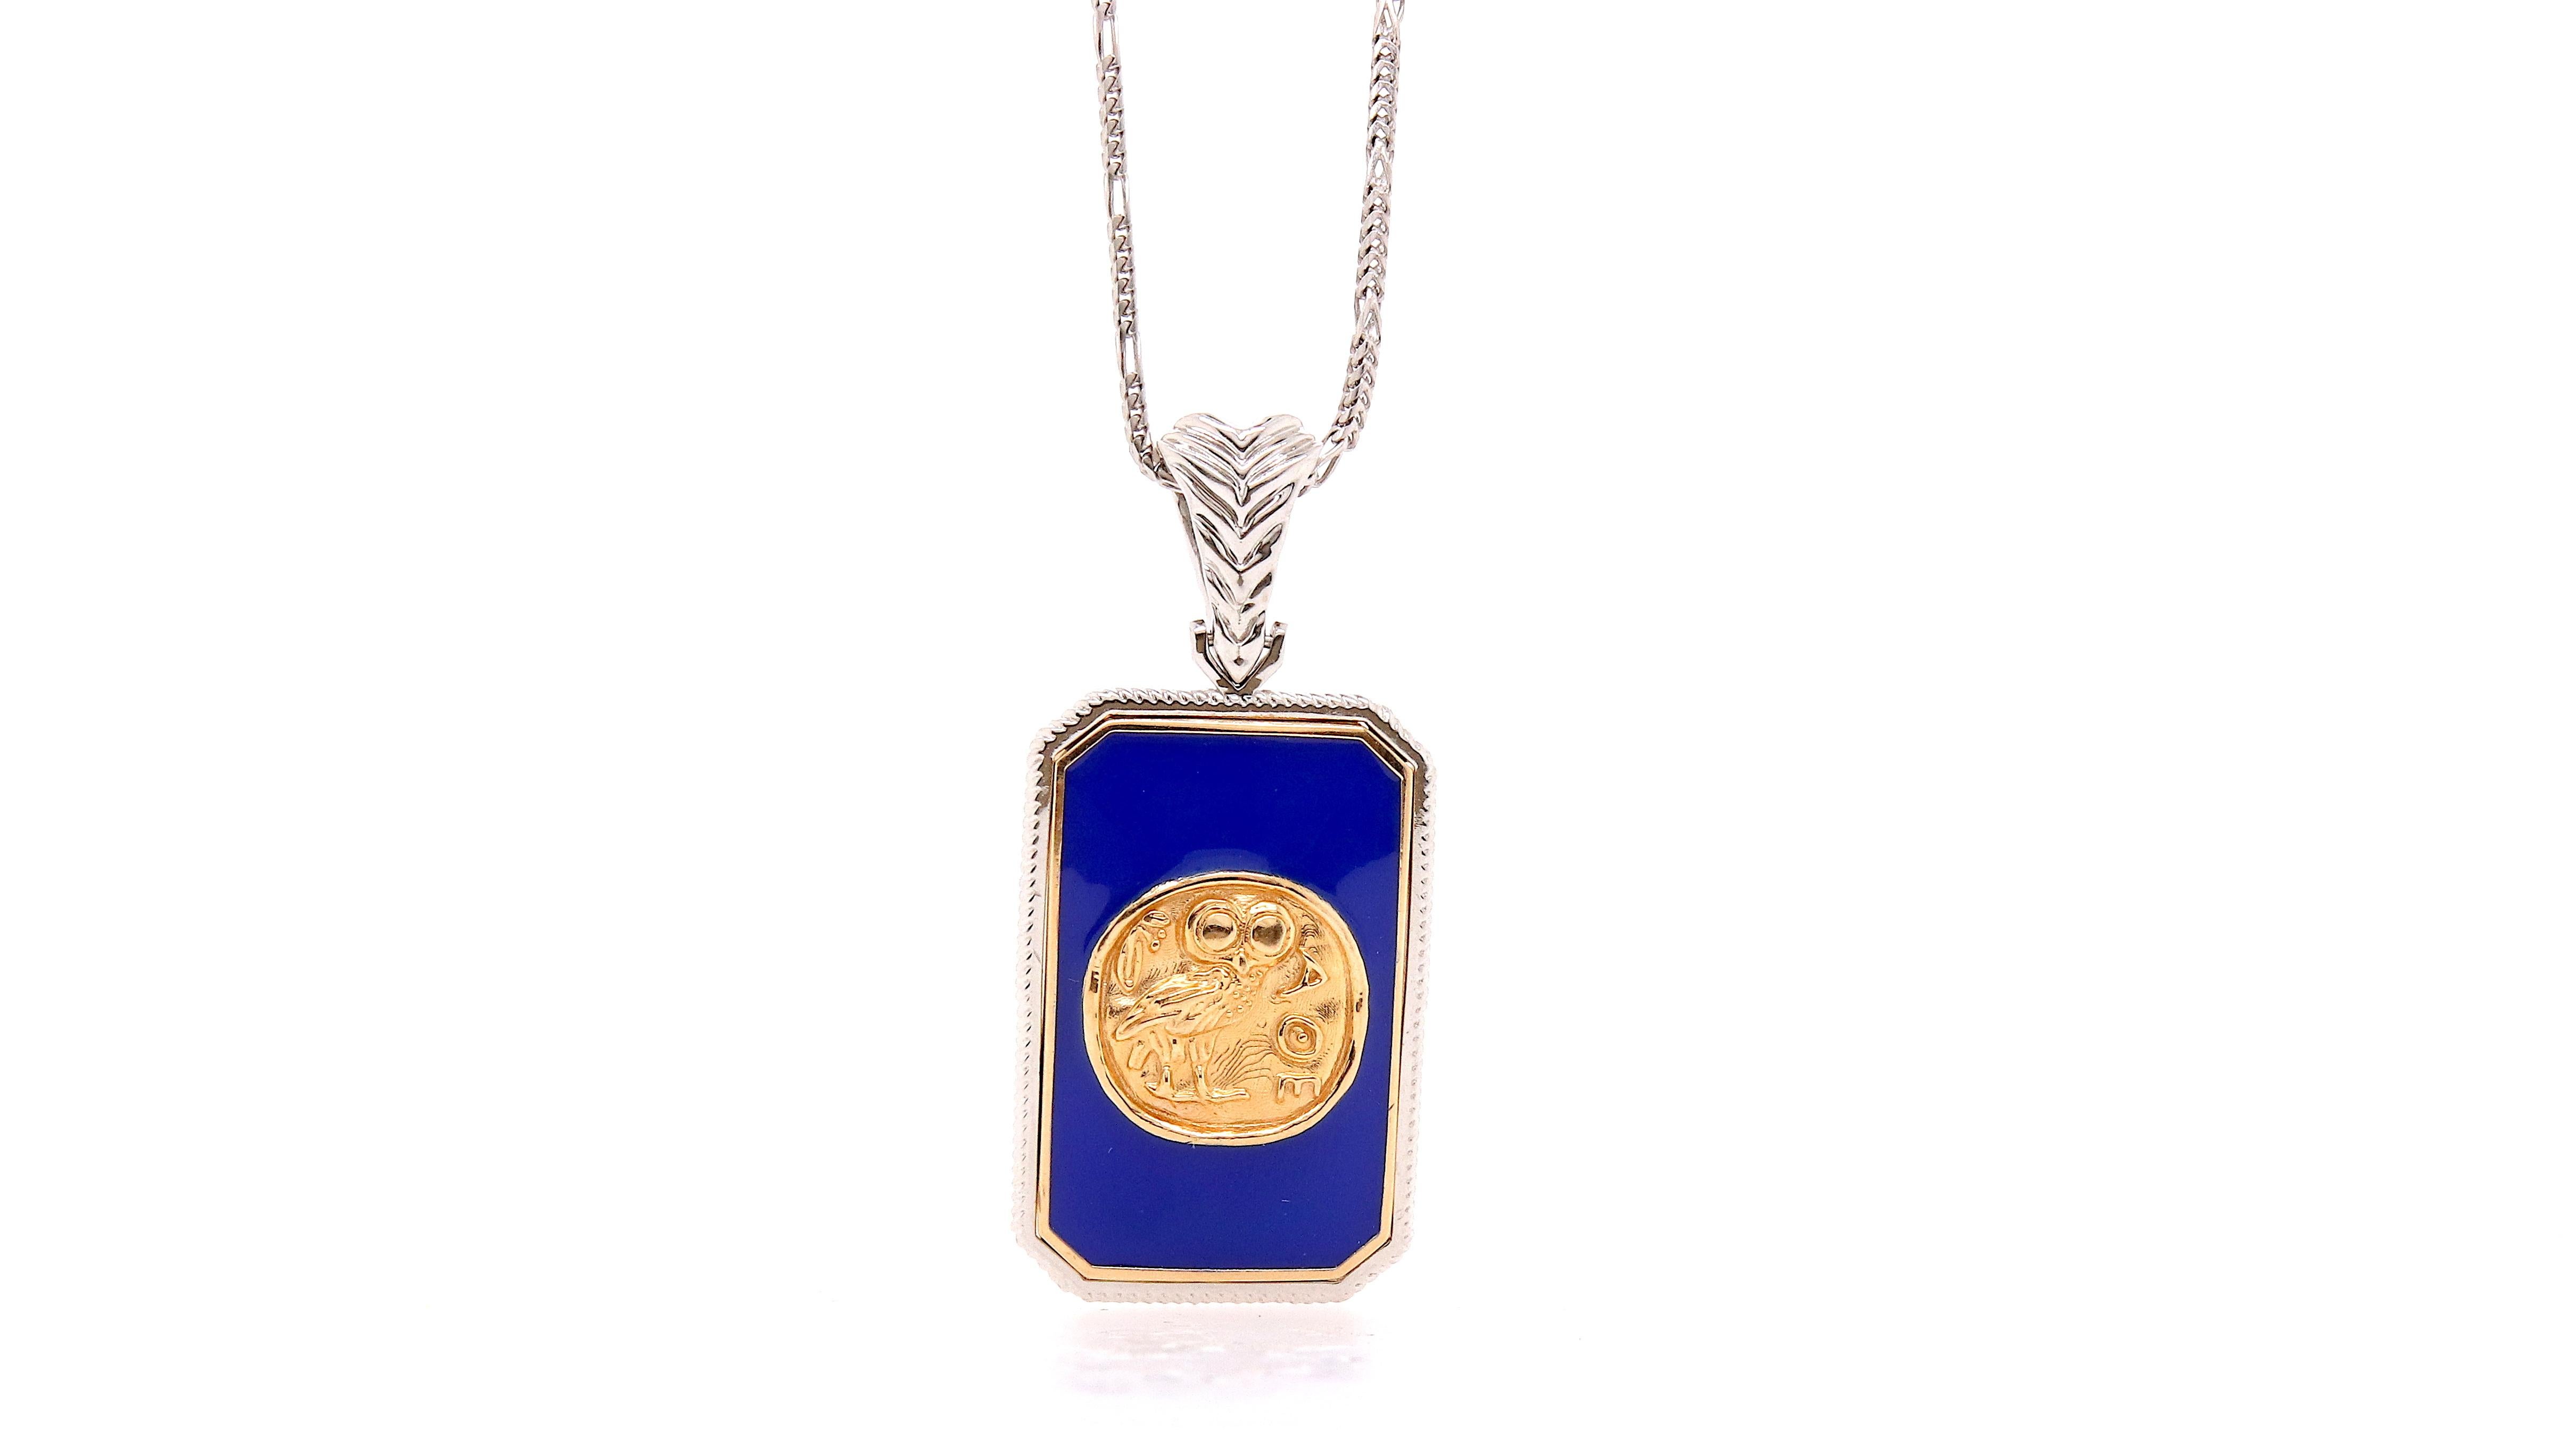 Reversible Men's Dog Tag Pendant

Material: 14K Two-Tone
Main Stone: 1 Round Diamond at 0.11 Carats

Fine one-of-a-kind craftsmanship meets incredible quality in this breathtaking piece of jewelry.

All Alberto pieces are made in the U.S.A. and come